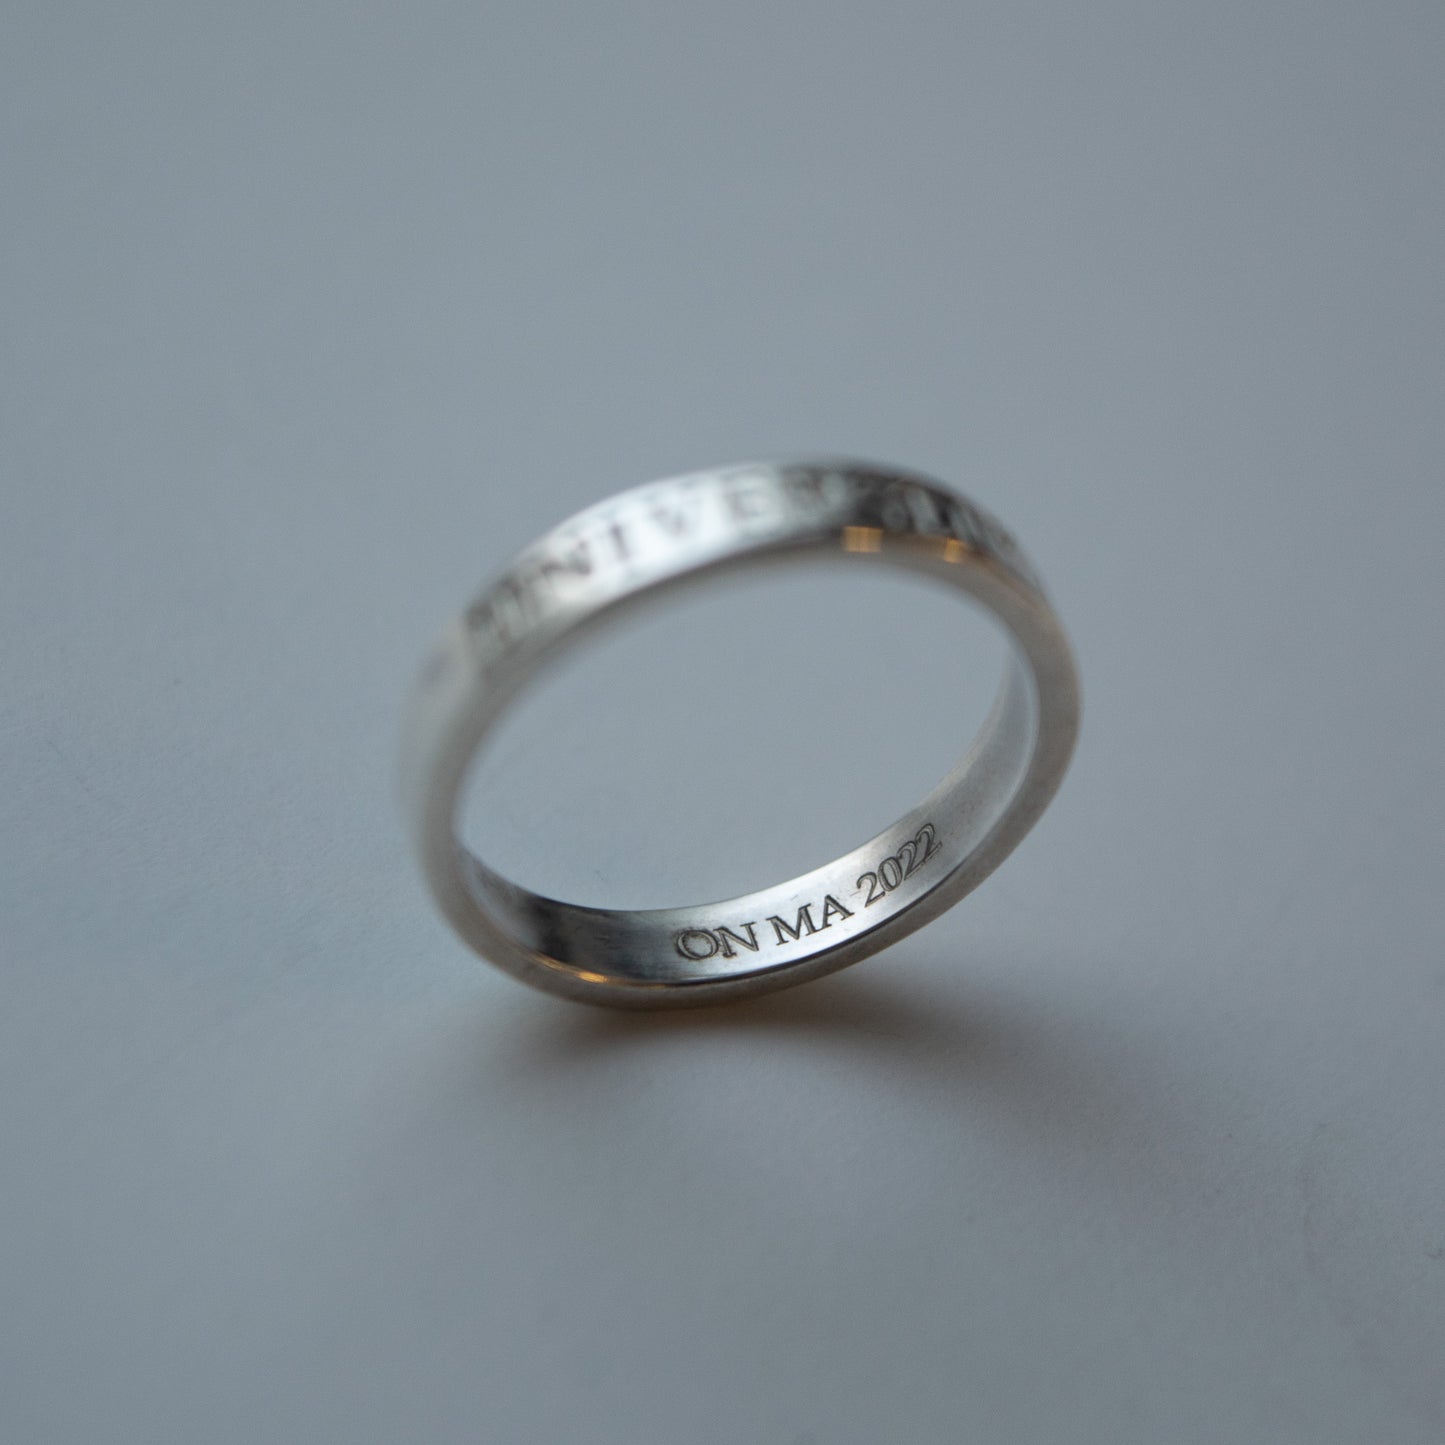 Close up image of the internal personalisation of the thin band silver graduation ring